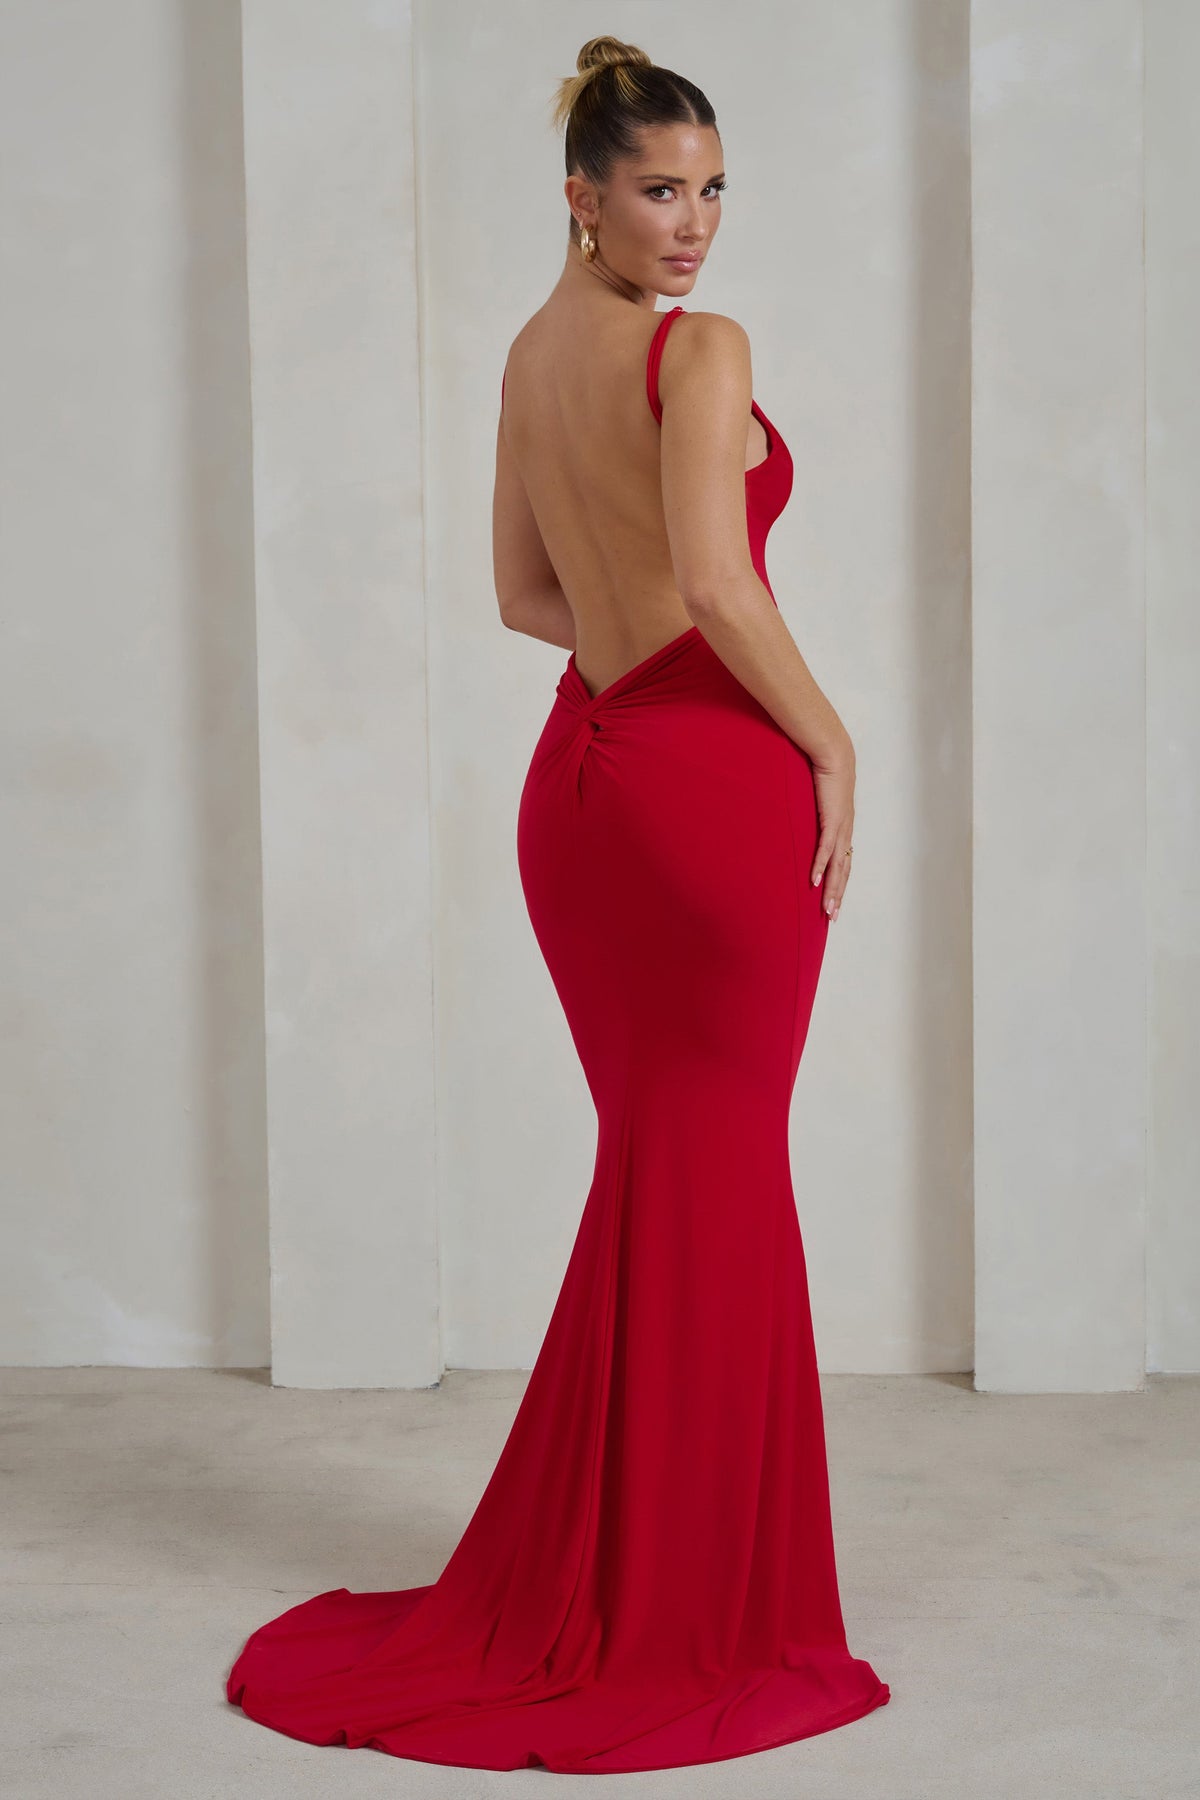 Backless Dresses Are the New Off-the-Shoulder Dresses - theFashionSpot